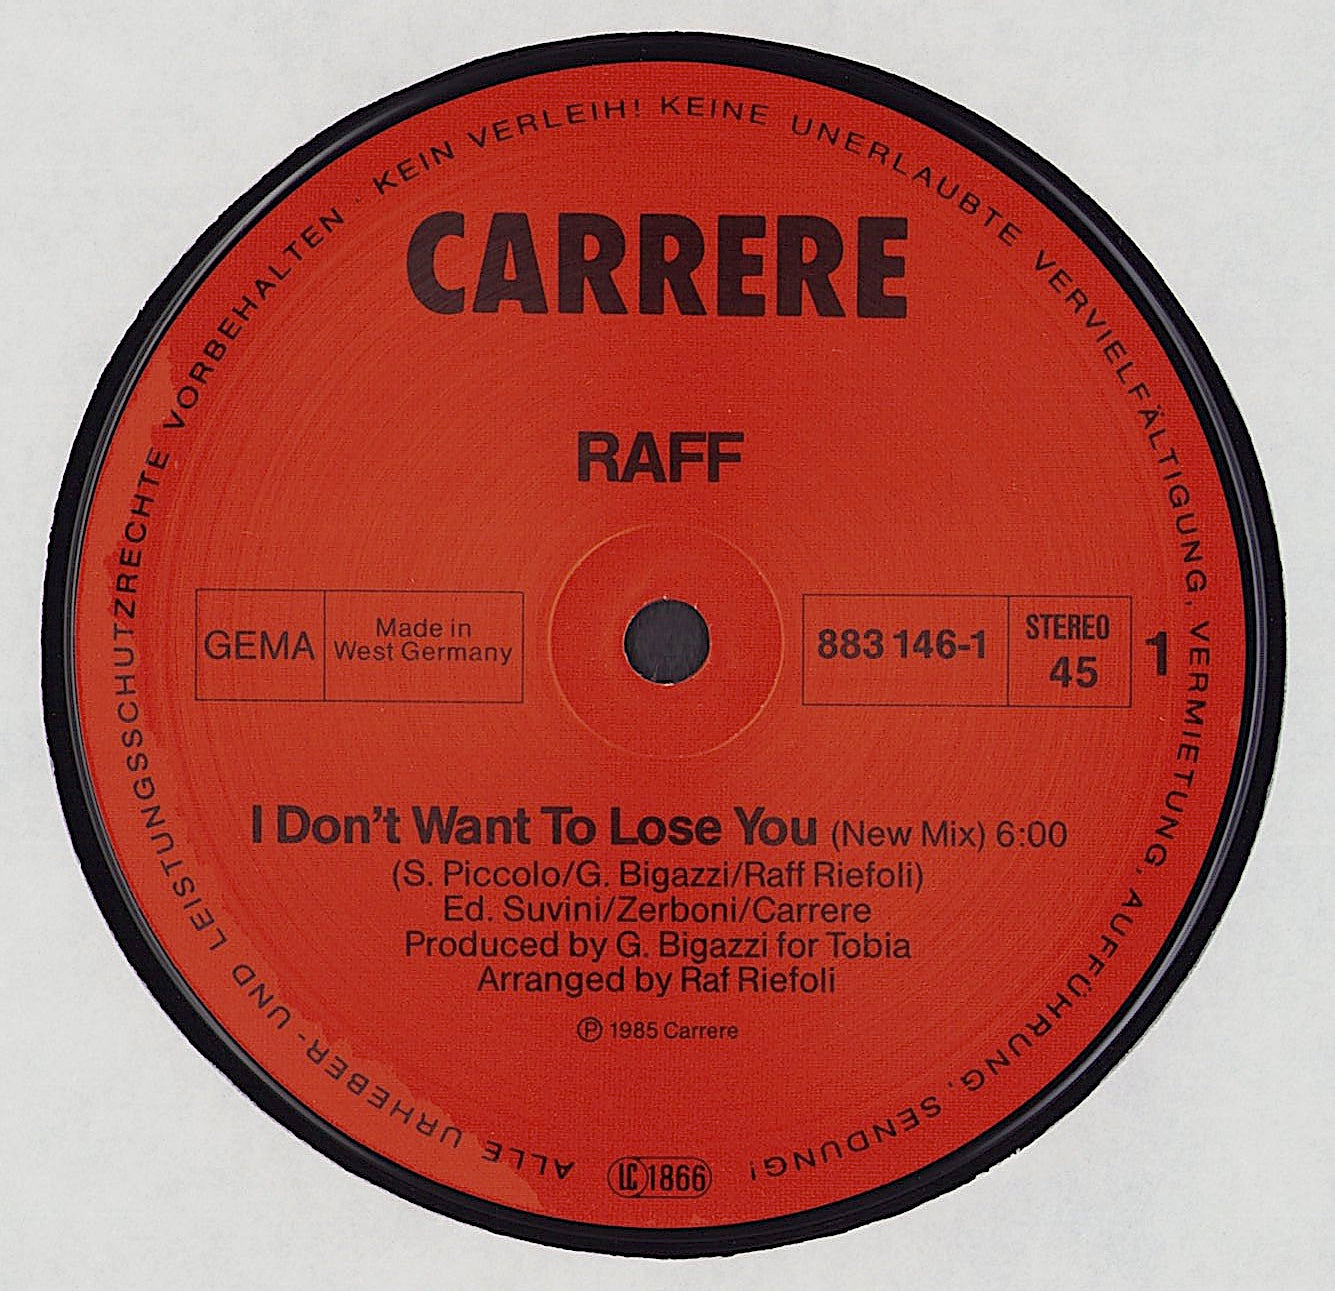 Raff - I Don't Want To Lose You New Version Vinyl 12"